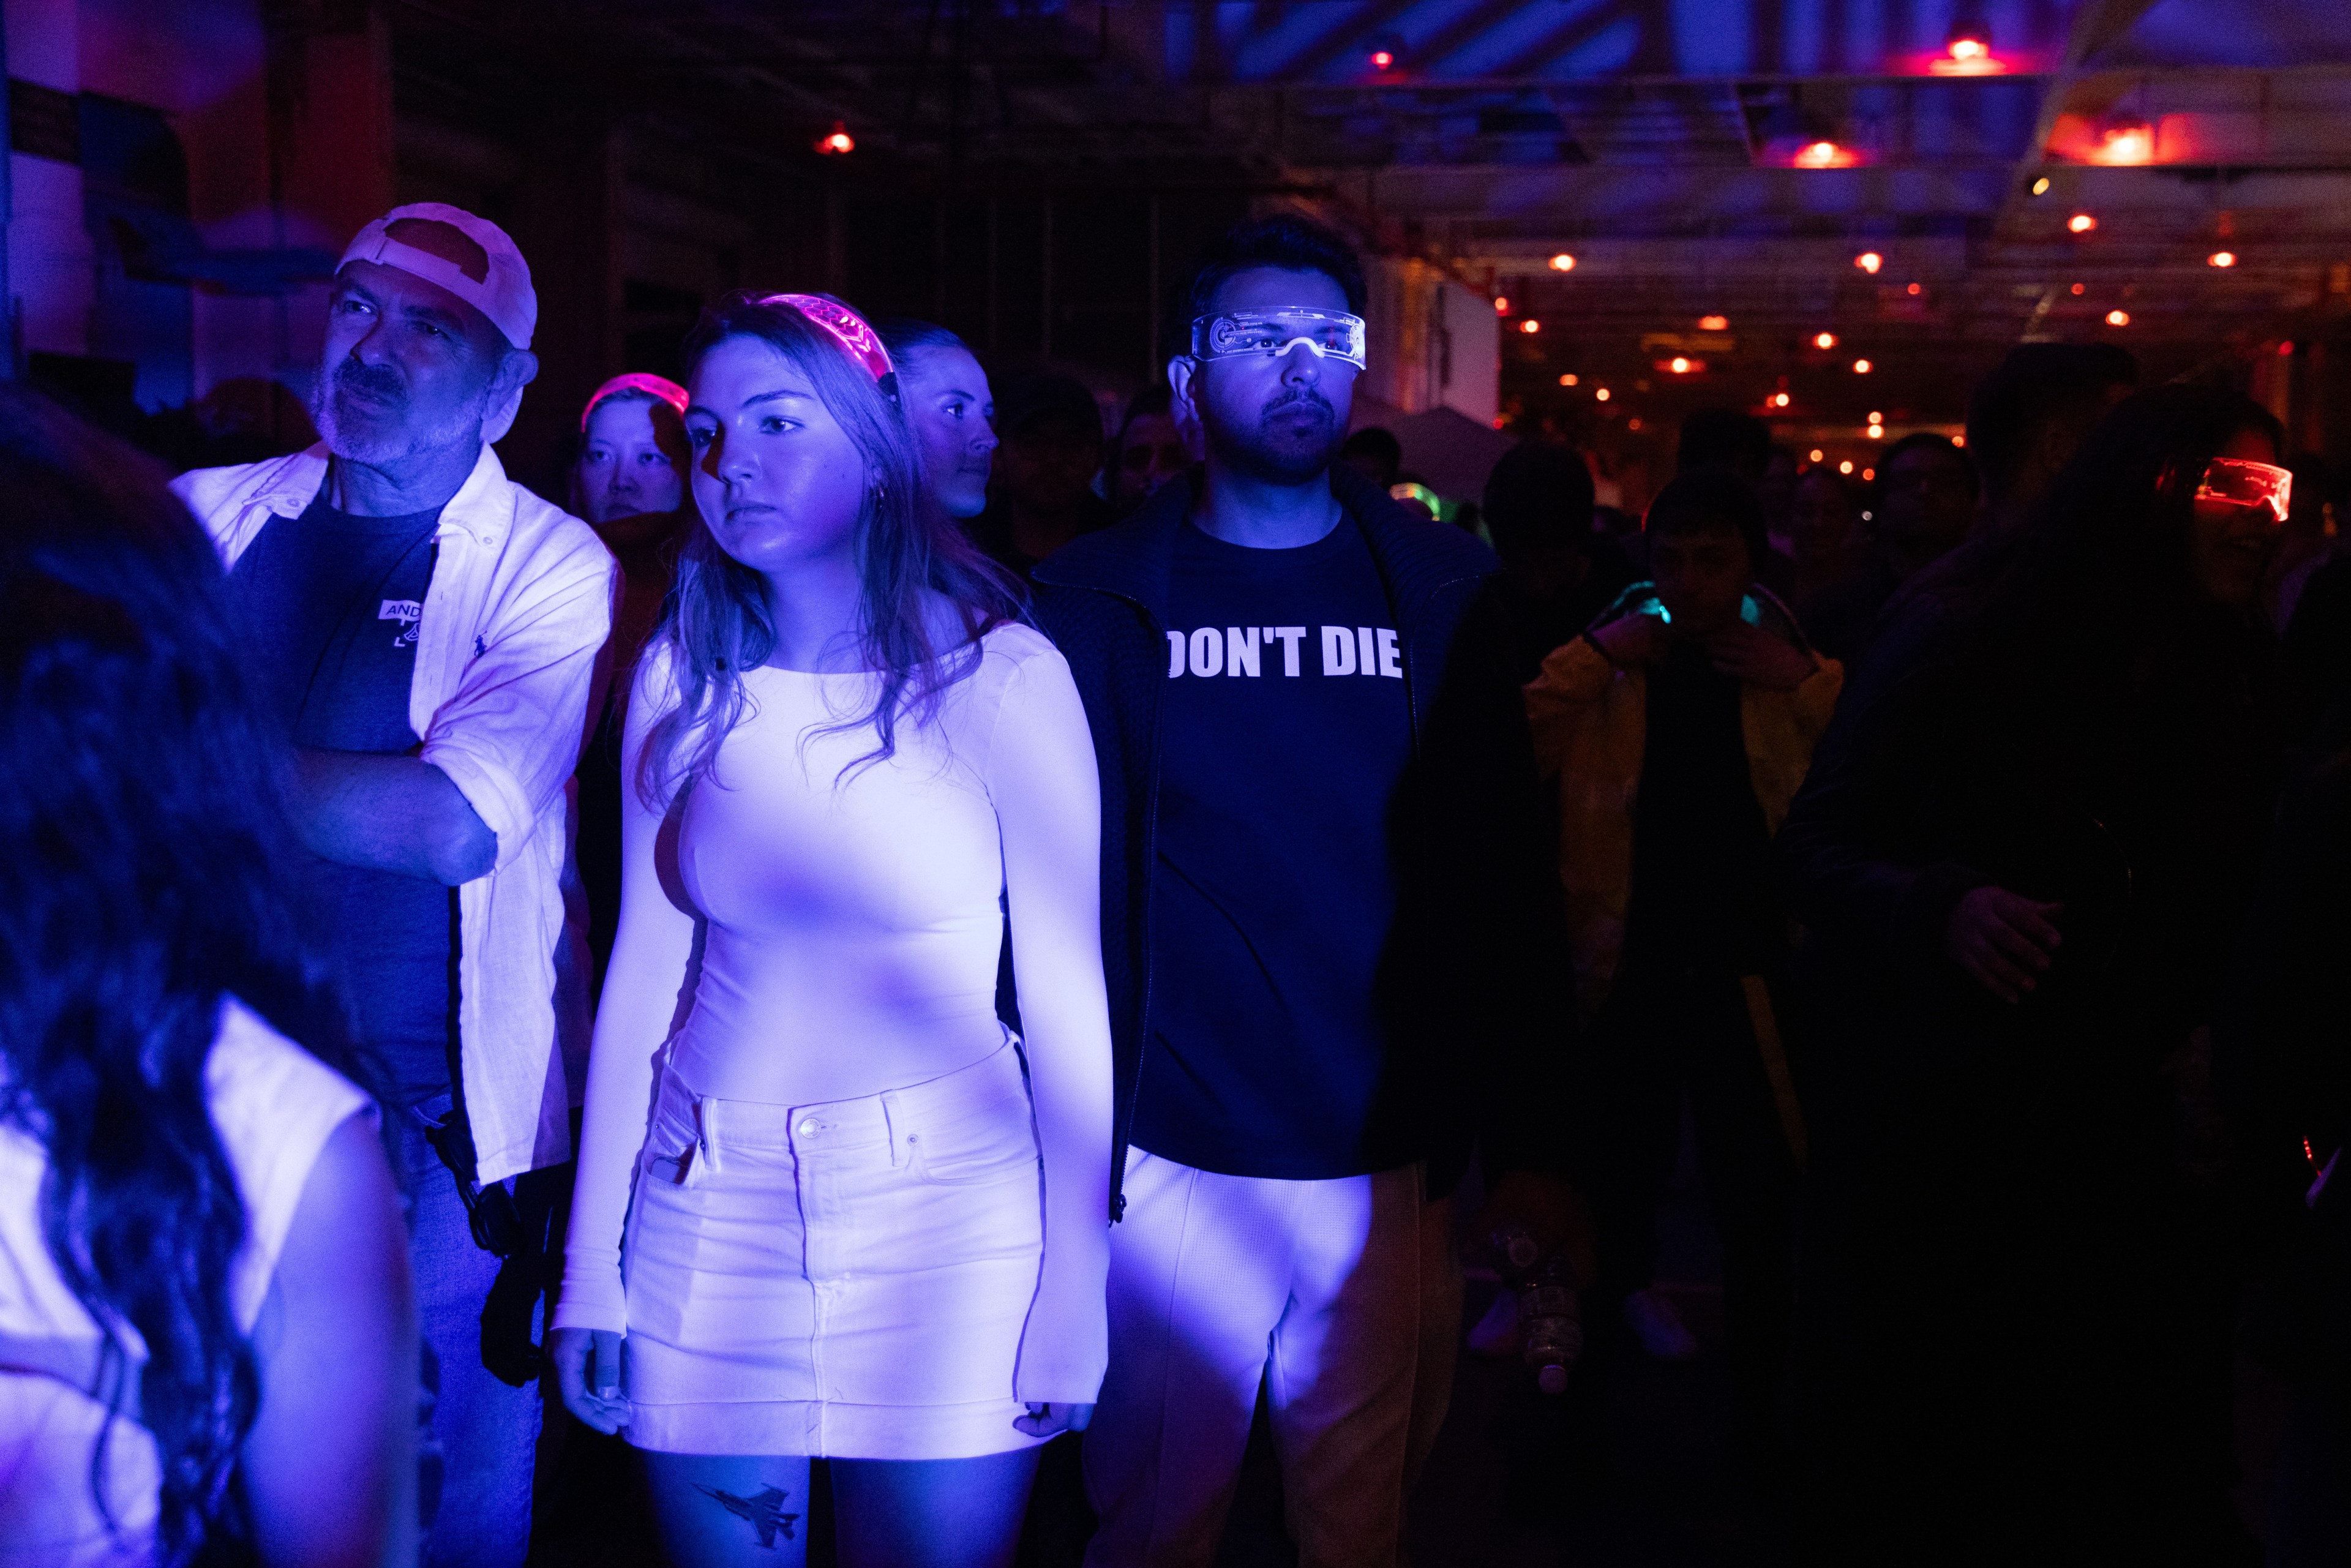 A group of people stand under blue and pink lights at an indoor event, with some wearing light-up accessories and a man in the center wearing a &quot;DON'T DIE&quot; shirt.